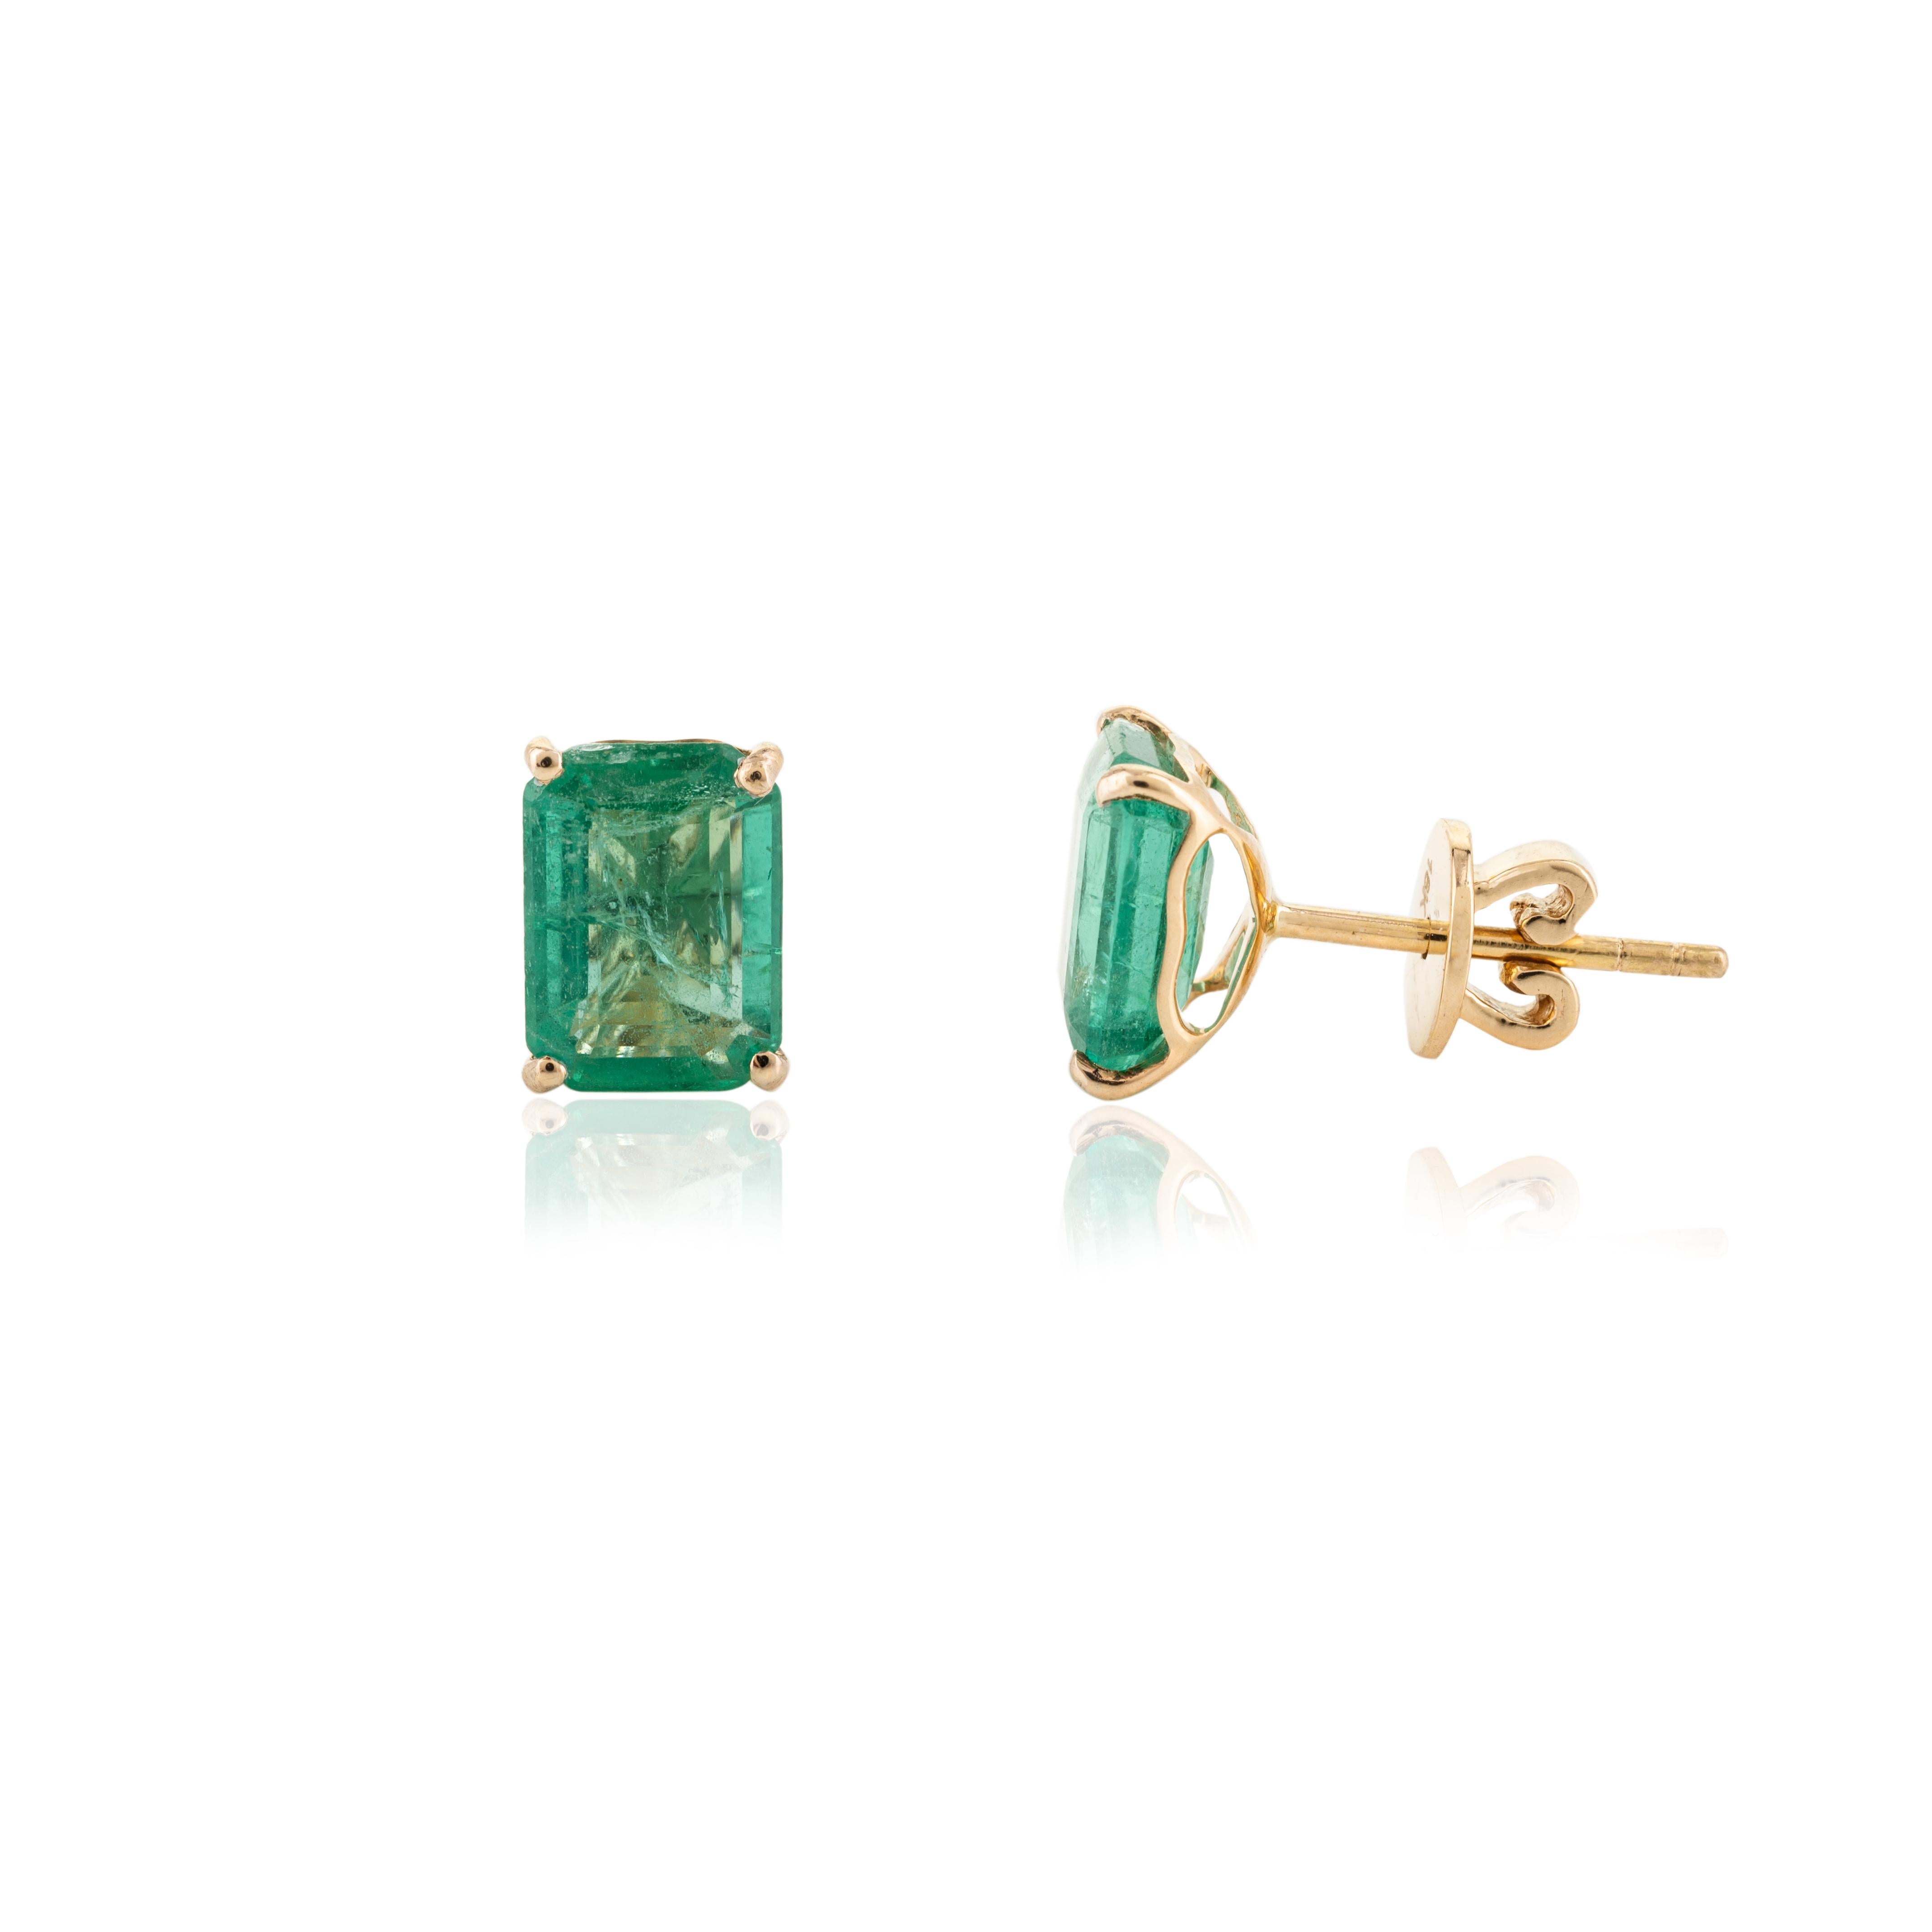 Natural Solitaire Emerald 18k Solid Yellow Gold Stud Earrings Gift for Her In New Condition For Sale In Houston, TX